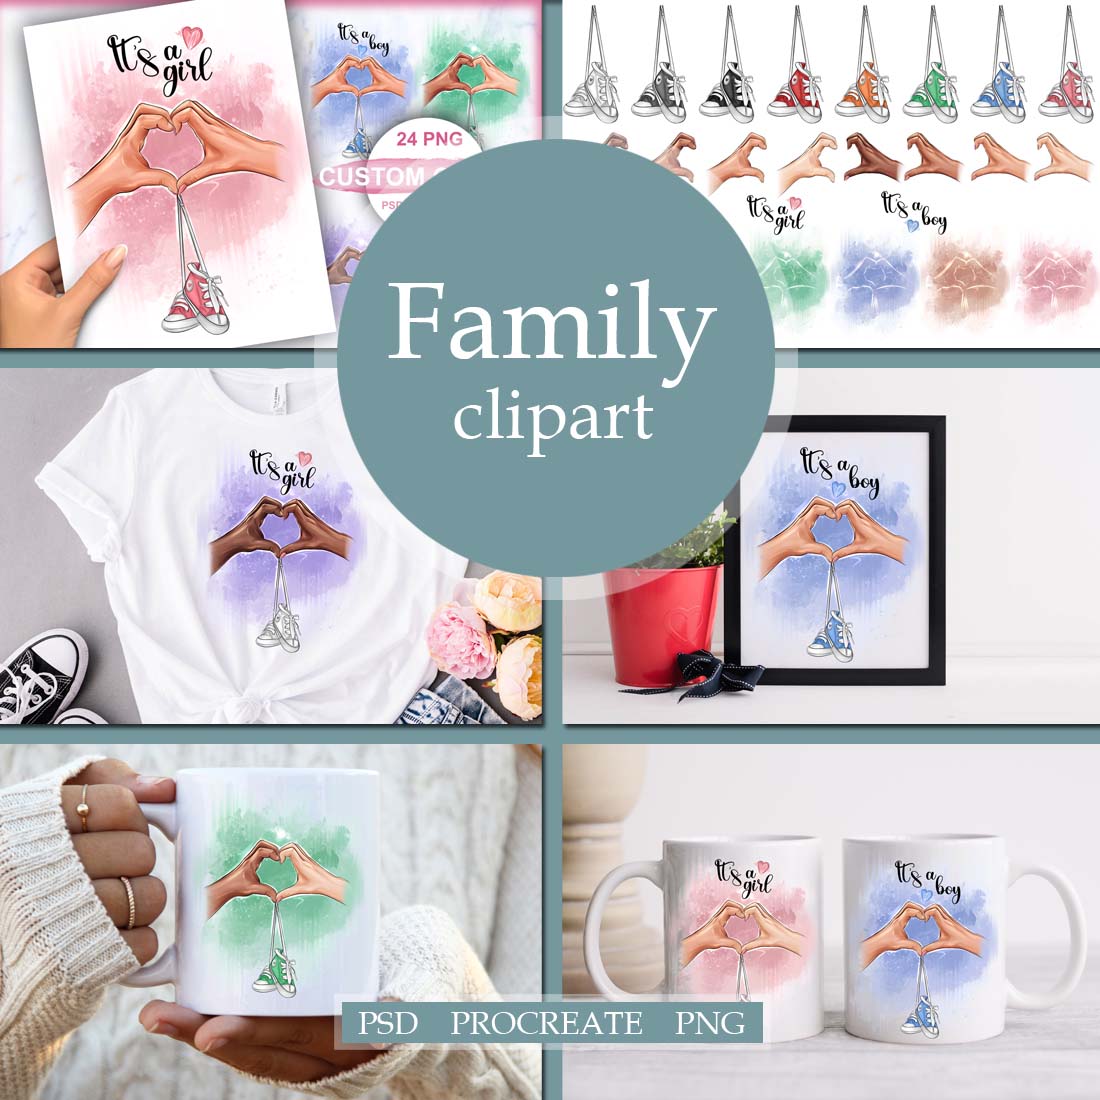 Mom And Dad Hands Family Clipart Cover Image.